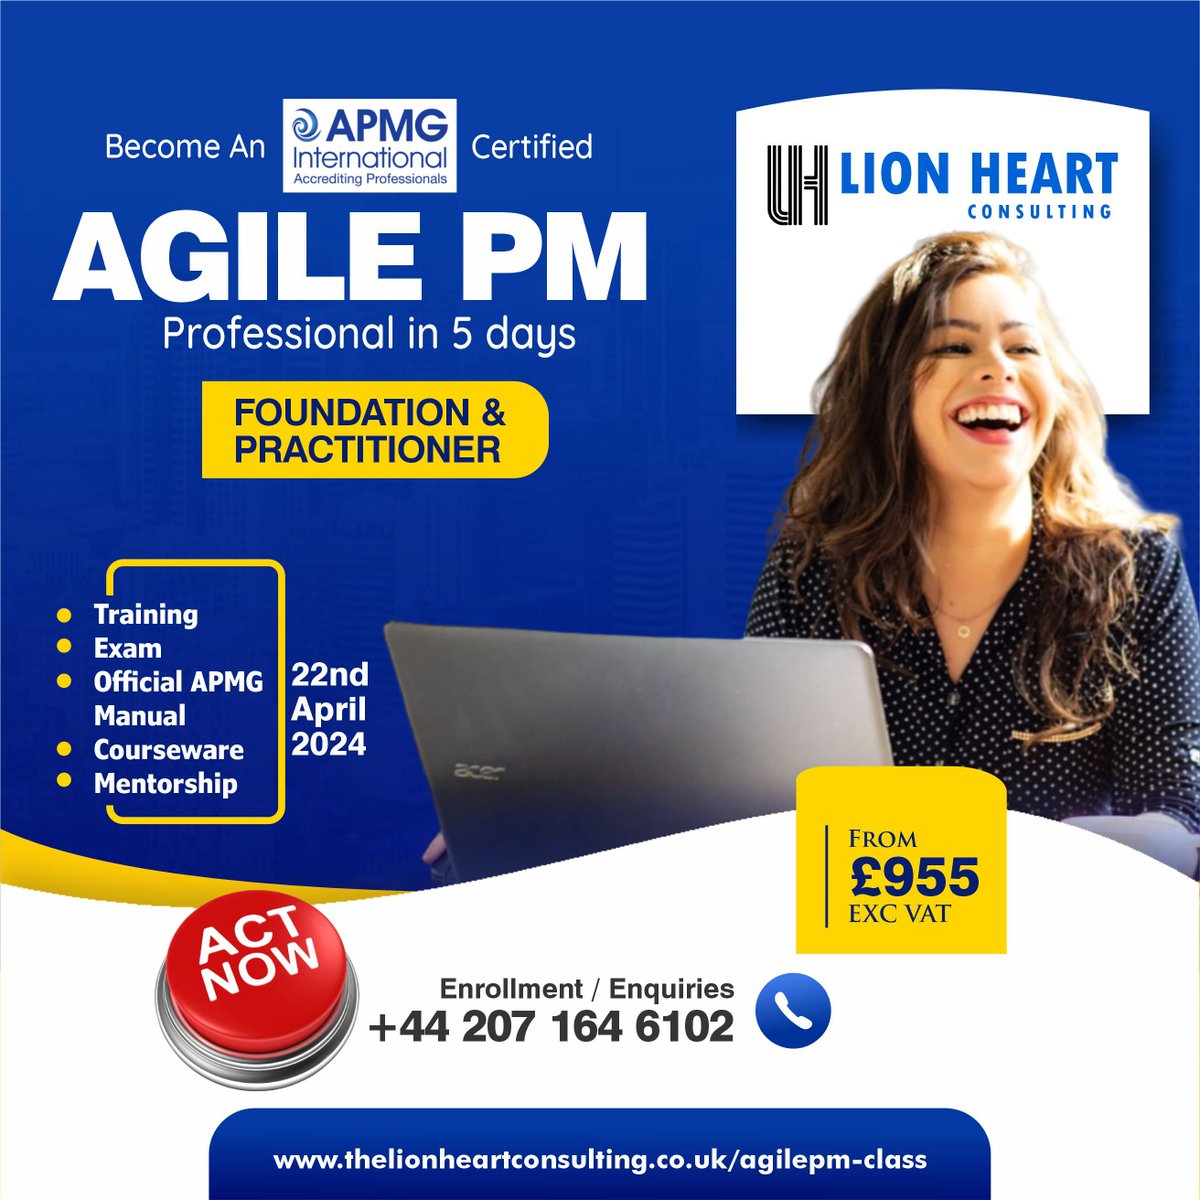 20% discount available on a first come basis

✨ Sign up here: thelionheartconsulting.co.uk/agilepm-class/
📞 +44 (0)20 7164 610

#agile #agile #agiletraining #agilepm #prince2 #prince2agile  #projectmanager #projects #businessanalyst #agilecoach #job #cv #productowner #softwareengineer